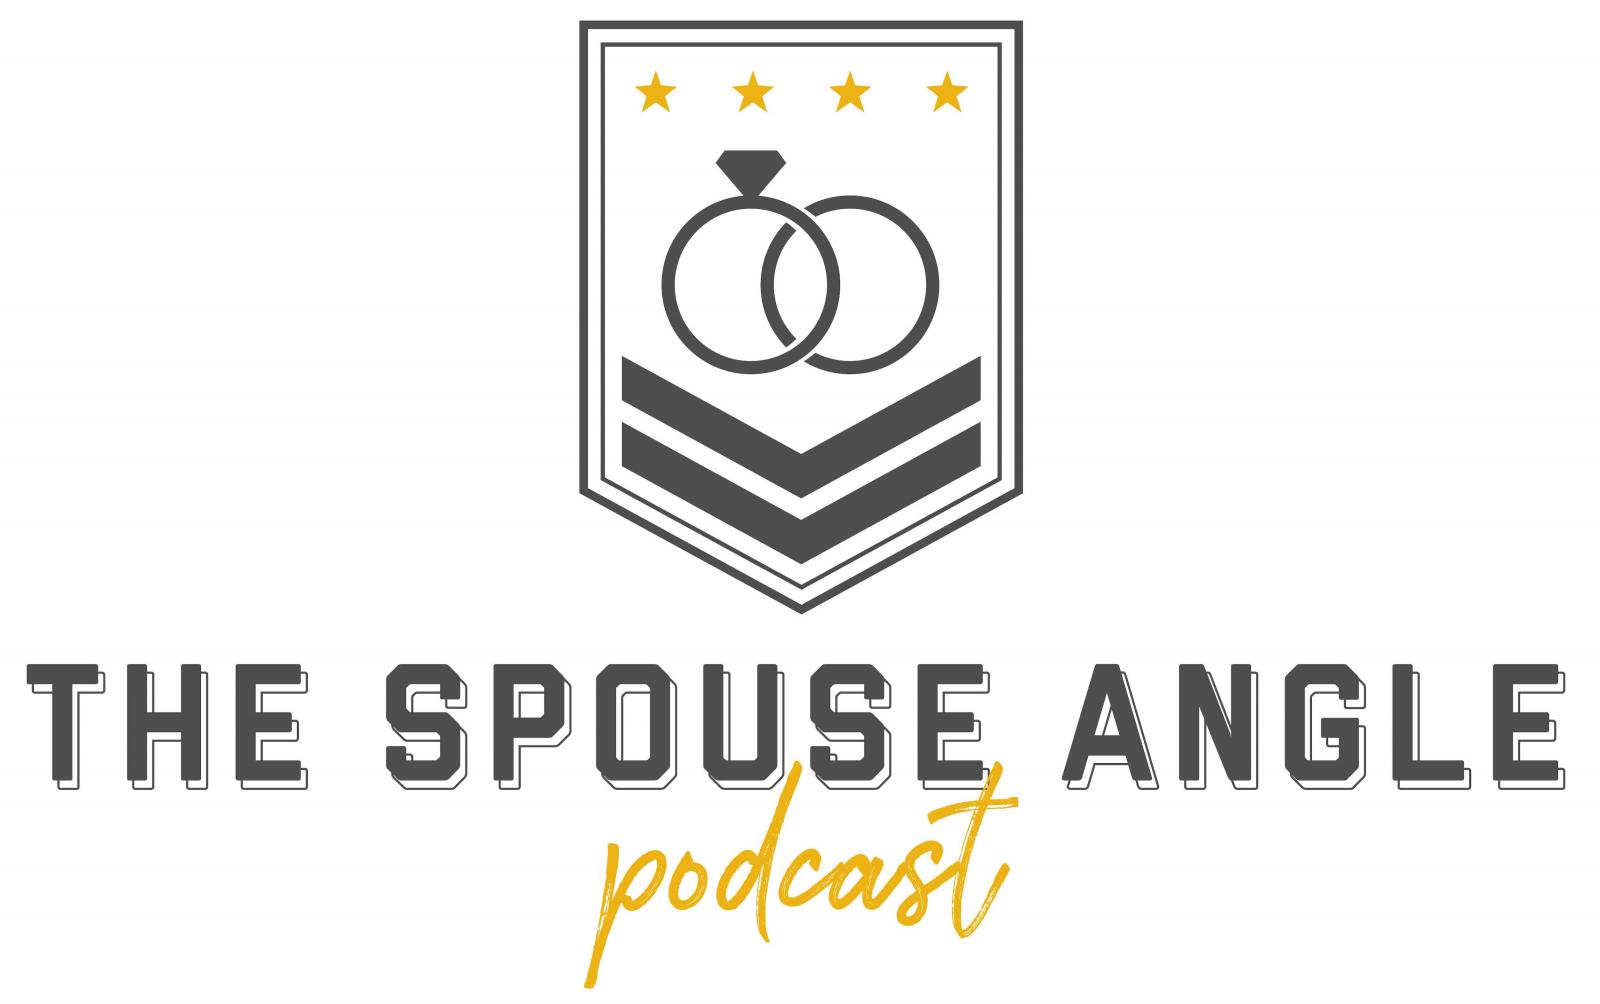  The Spouse Angle Podcast — Up this week: An Army Spouse’s Journey from Homelessness and Incarceration to Running a Nonprofit